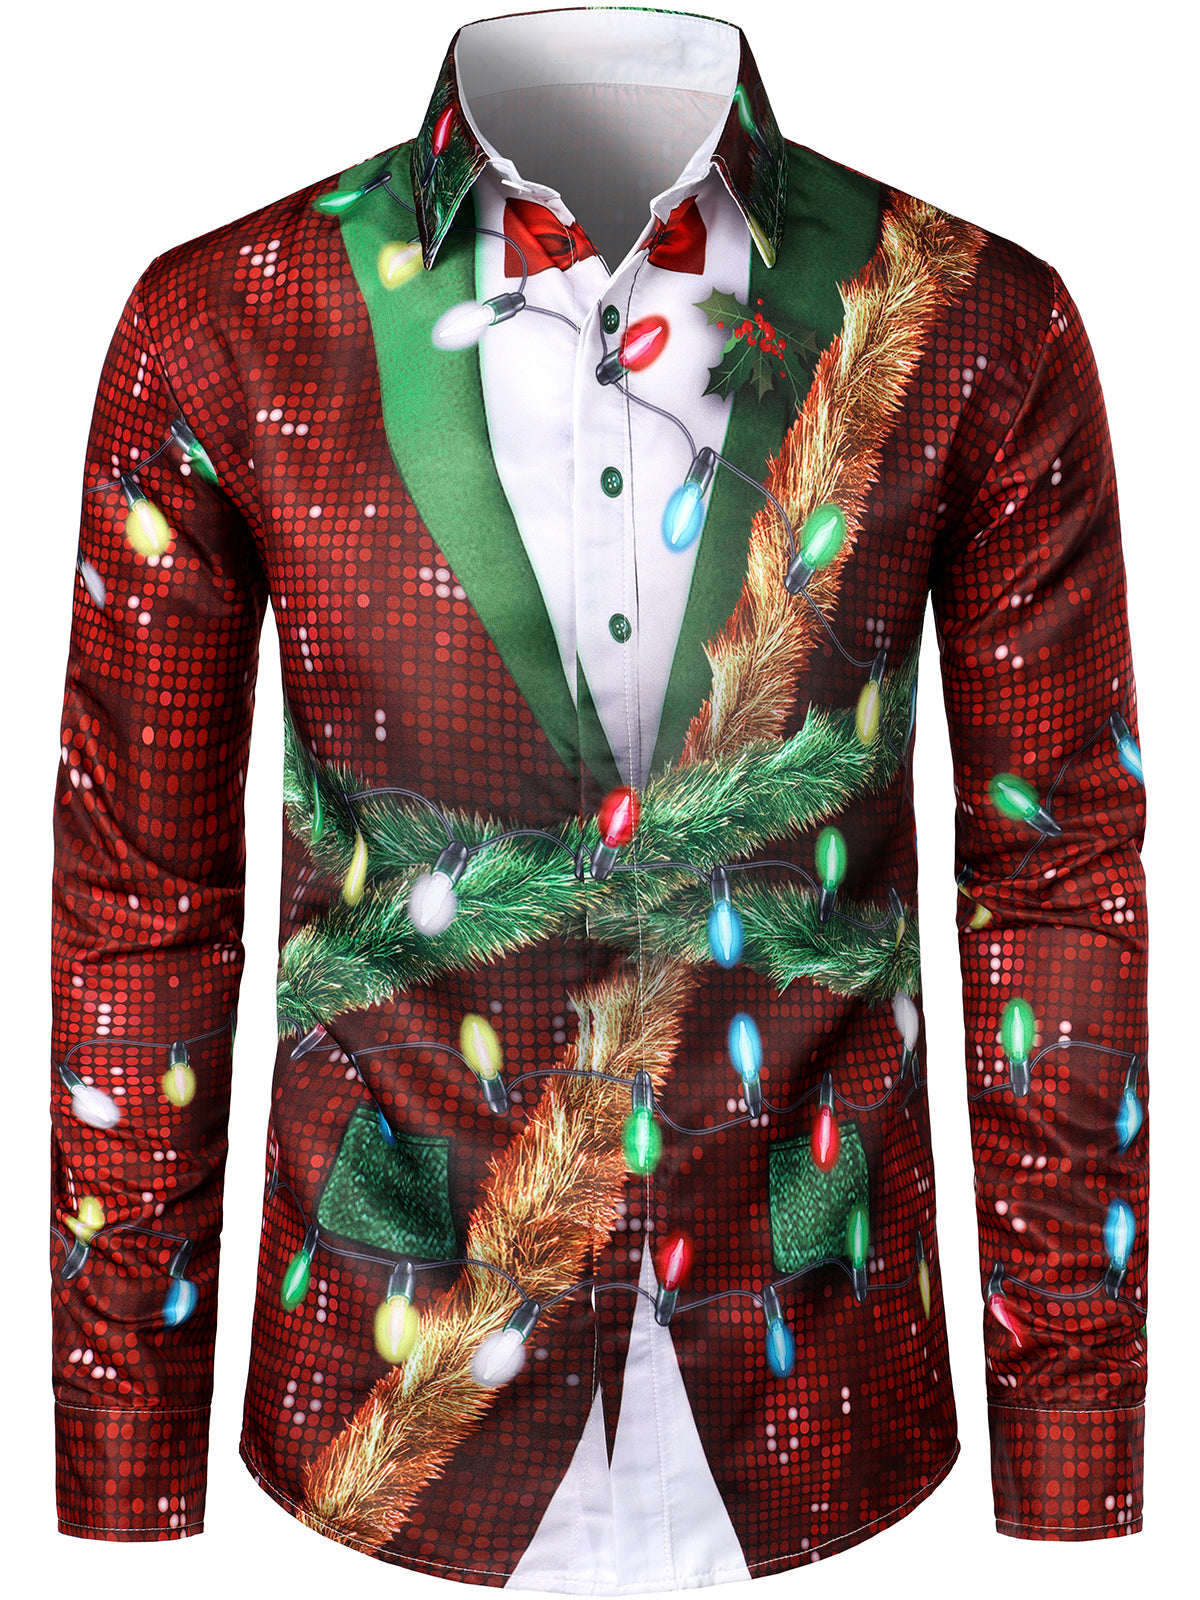 Men's Christmas Funny Outfit Themed Top Vacation Disco Button Long Sleeve Dress Shirt